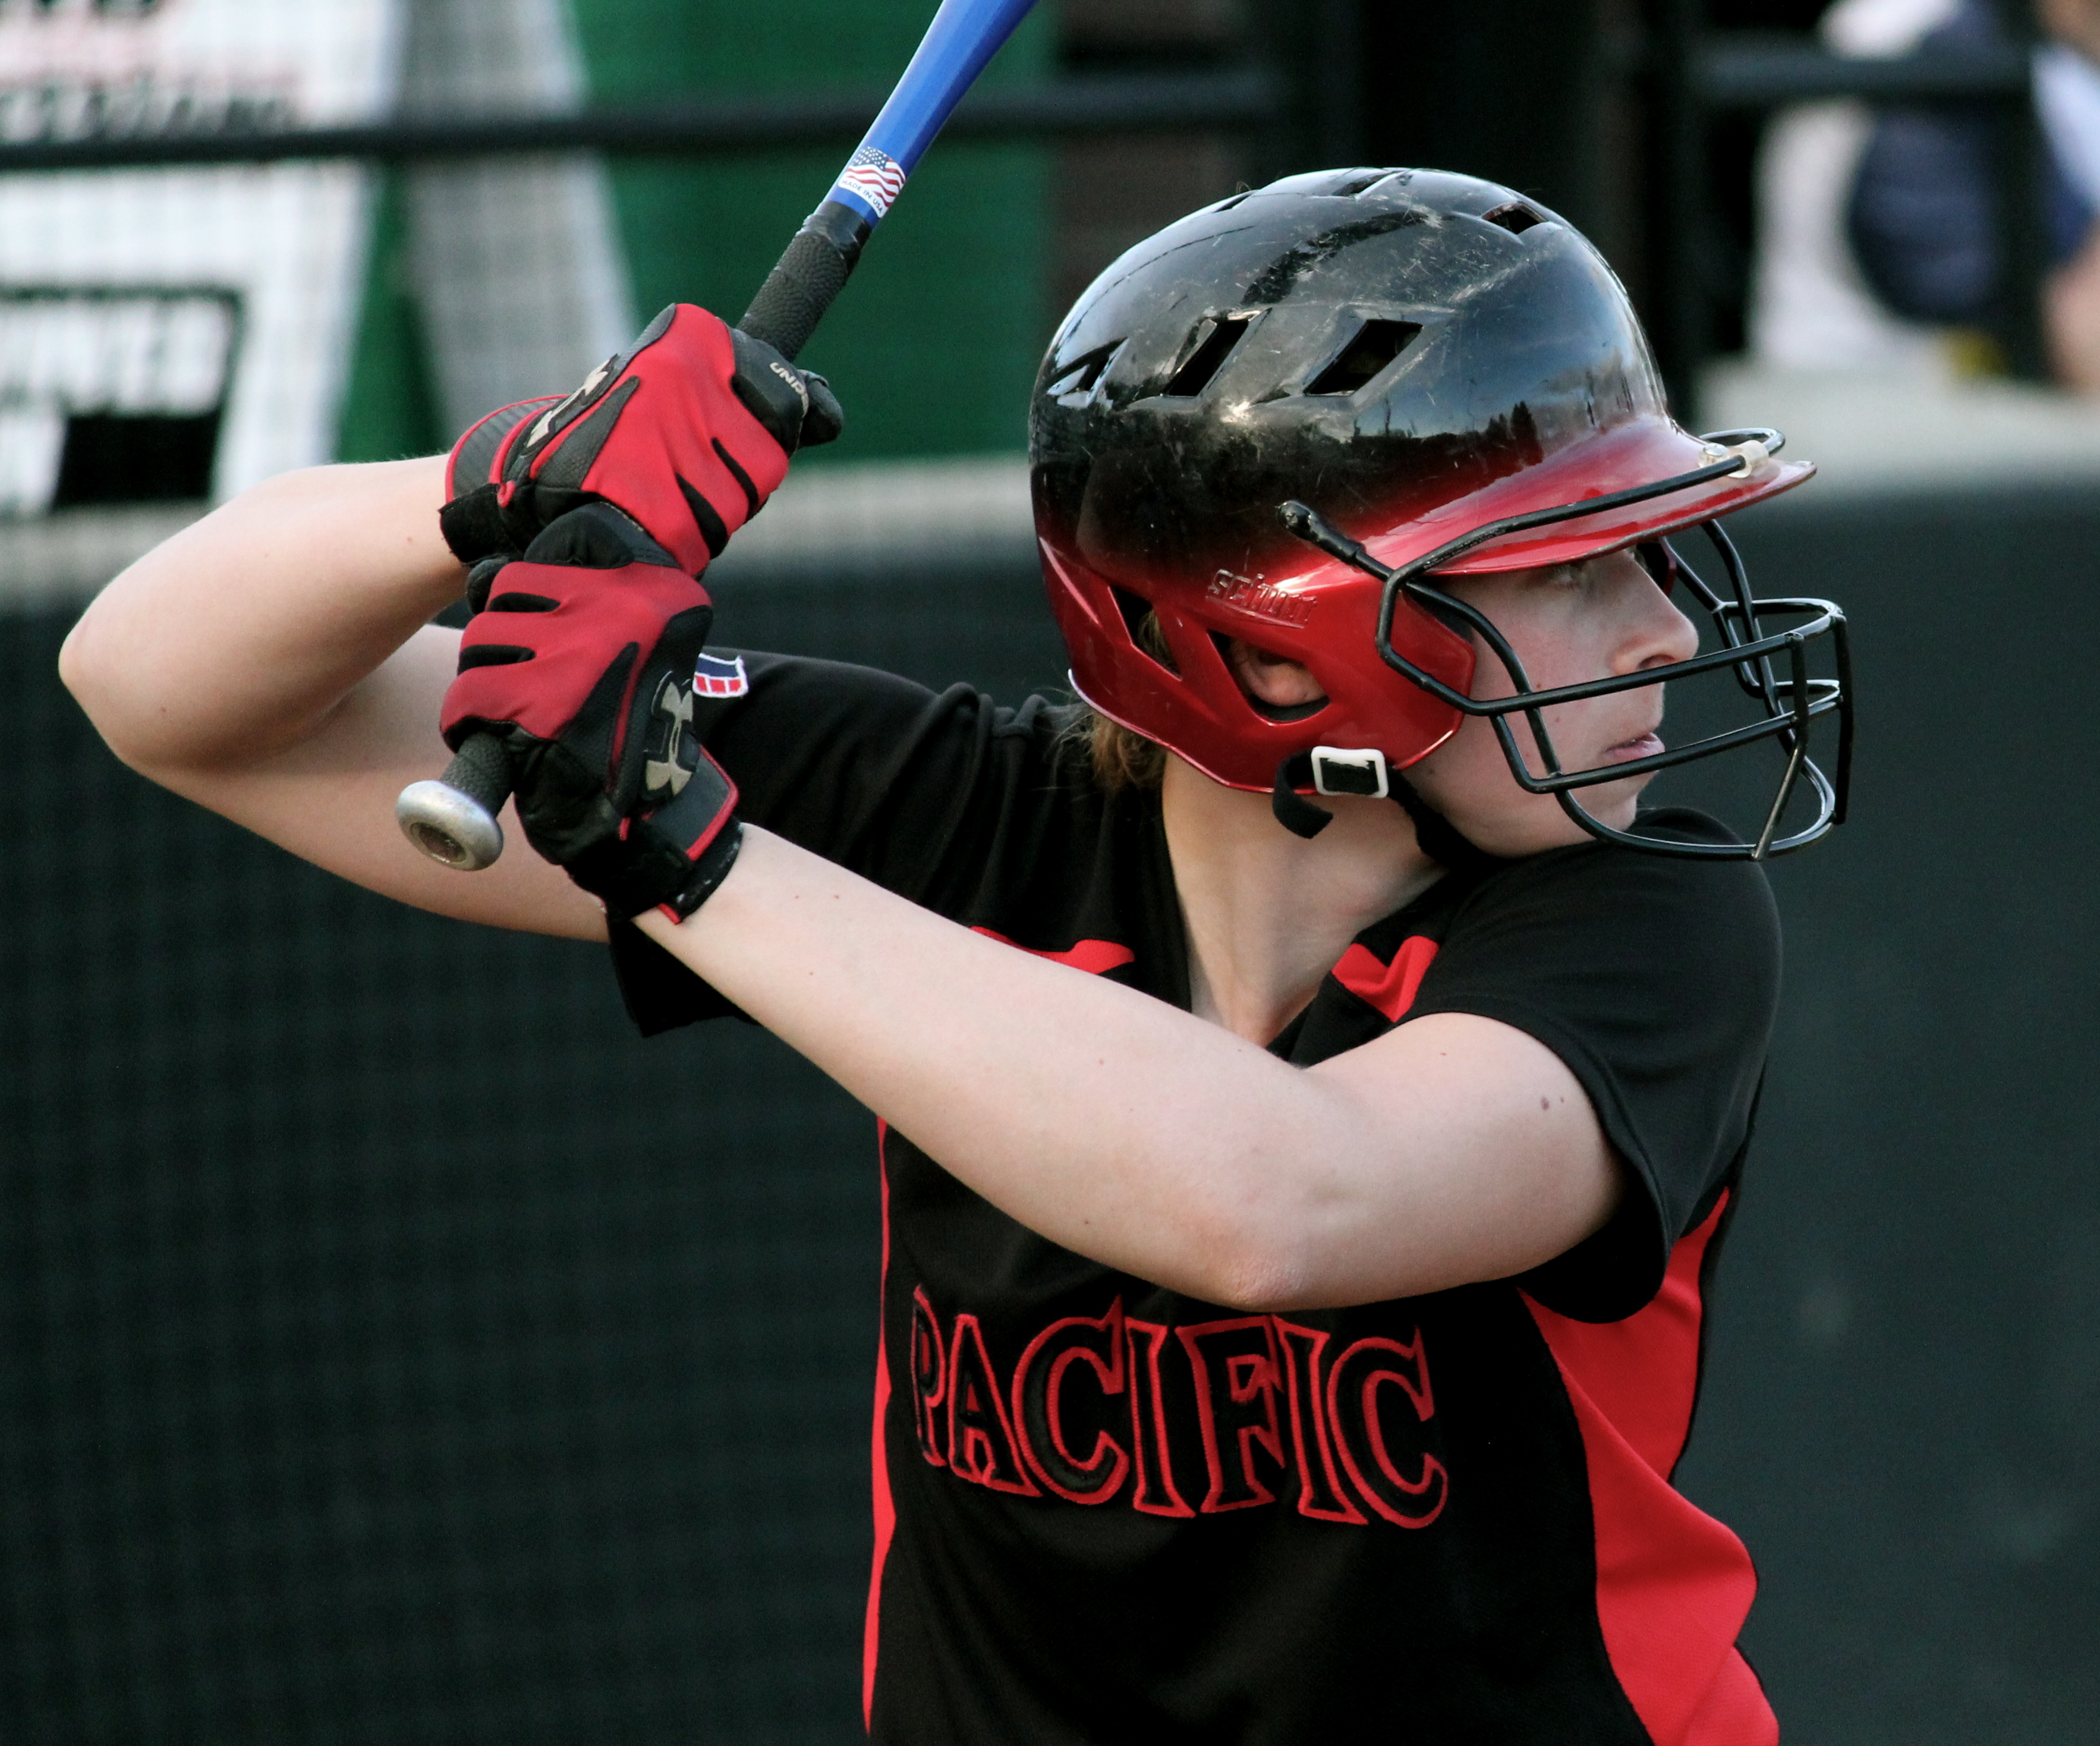 A Pacific softball player stands at the plate prepared to receive a pitch.